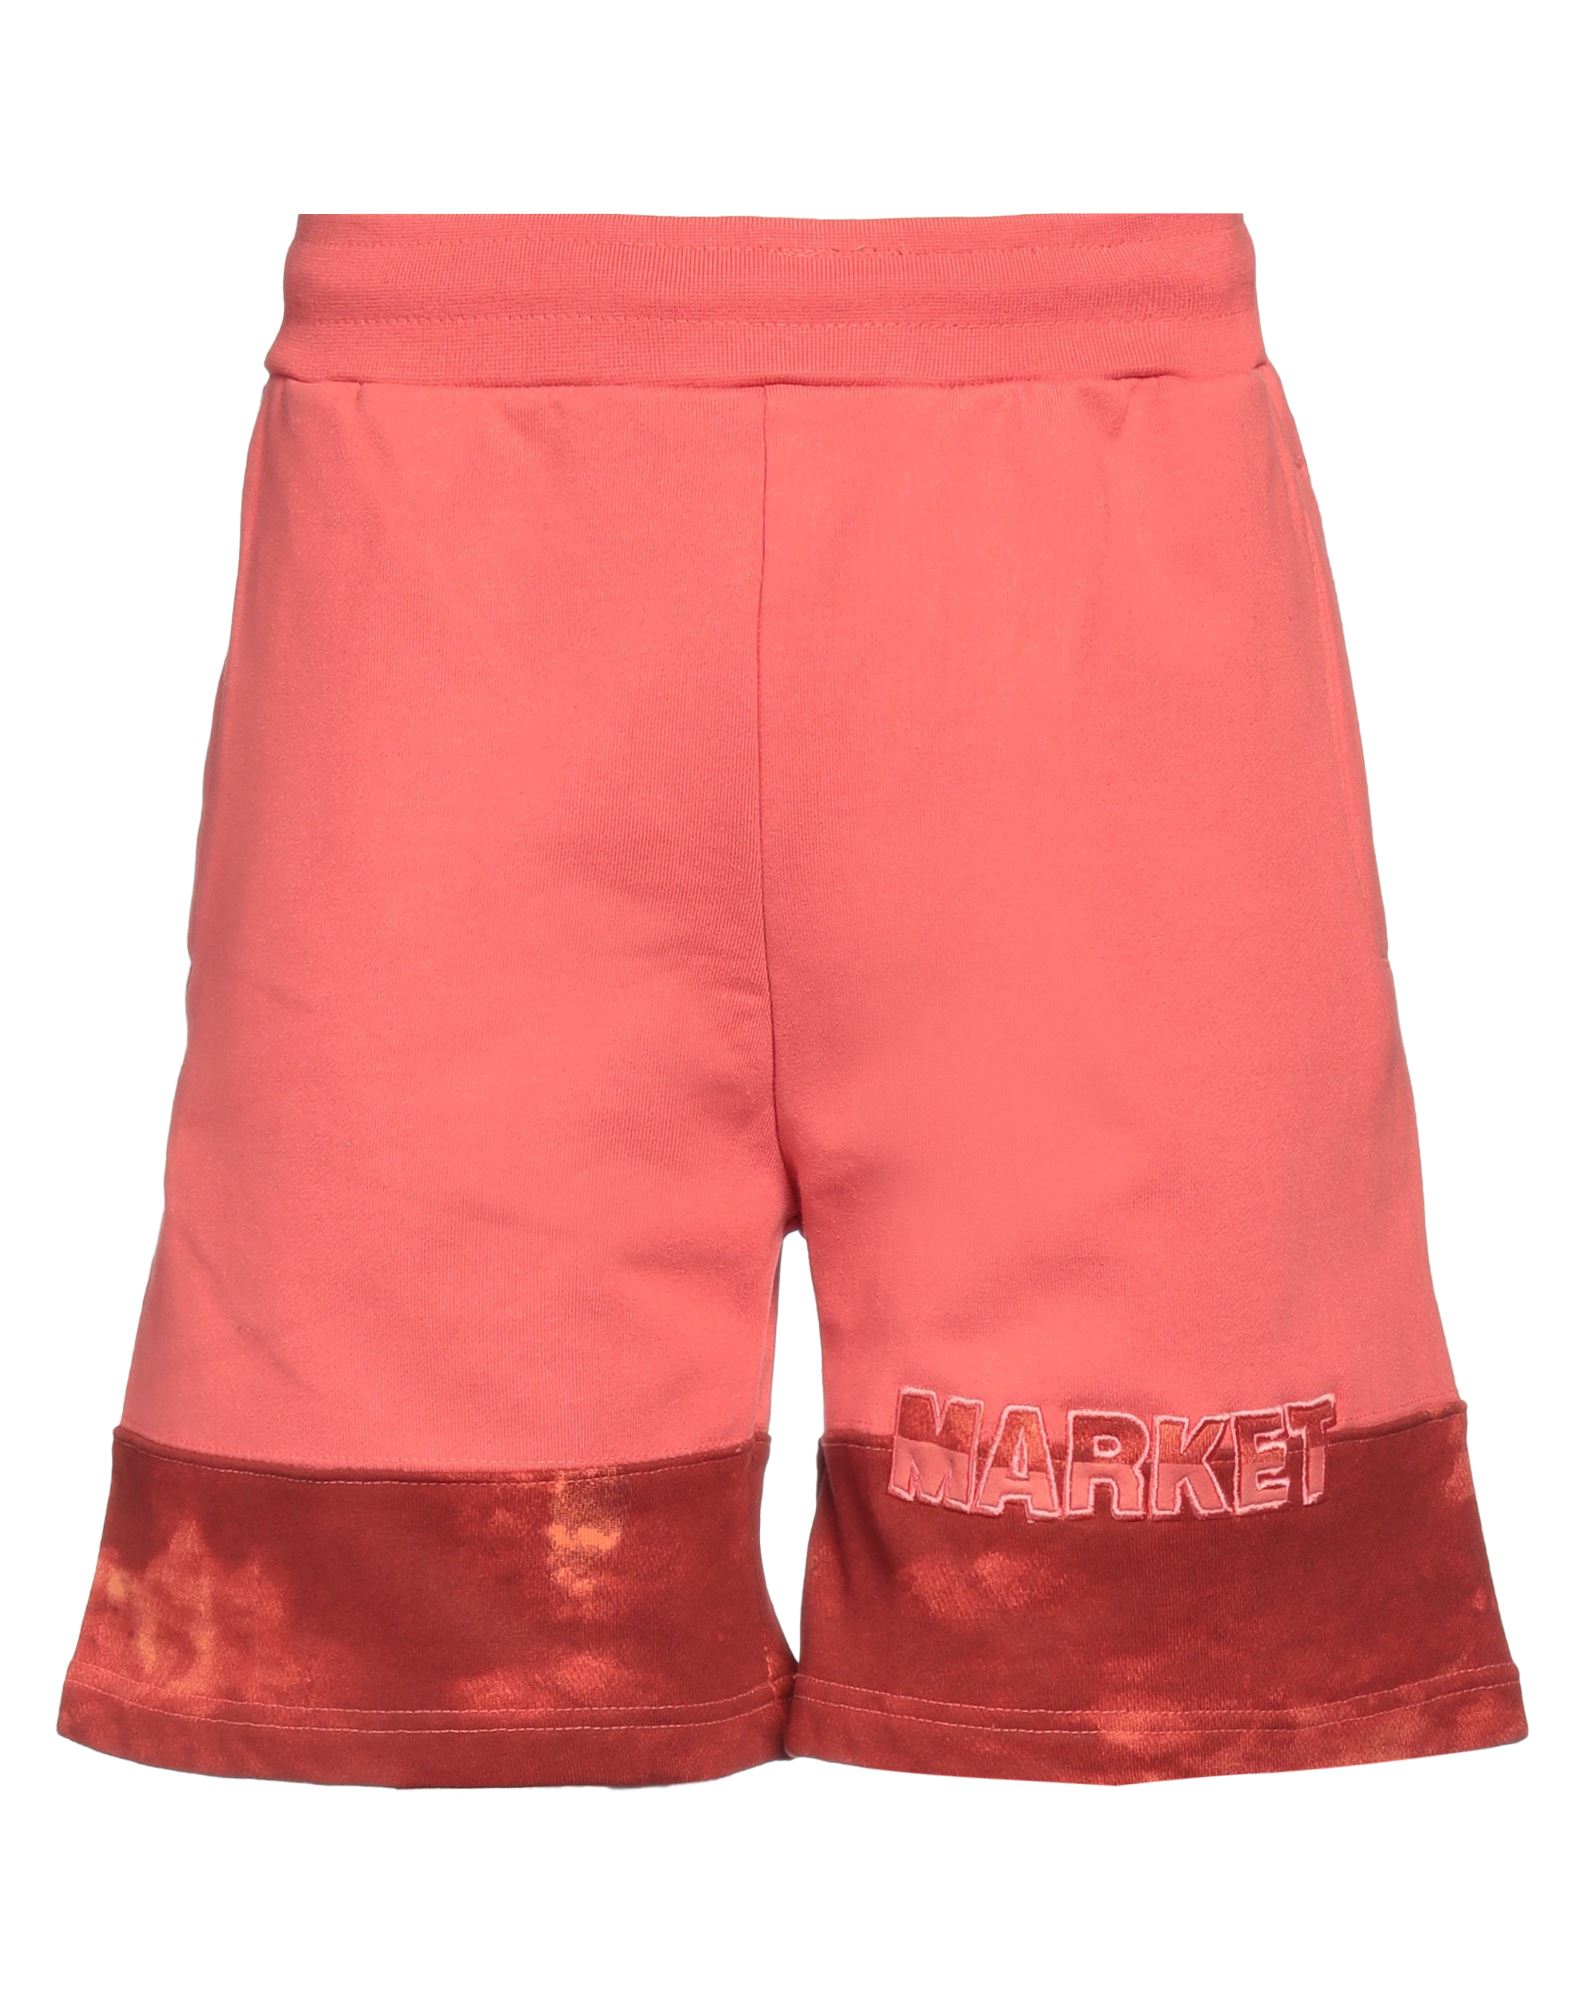 Markup Man Shorts & Bermuda Shorts Coral Size L Cotton In Red